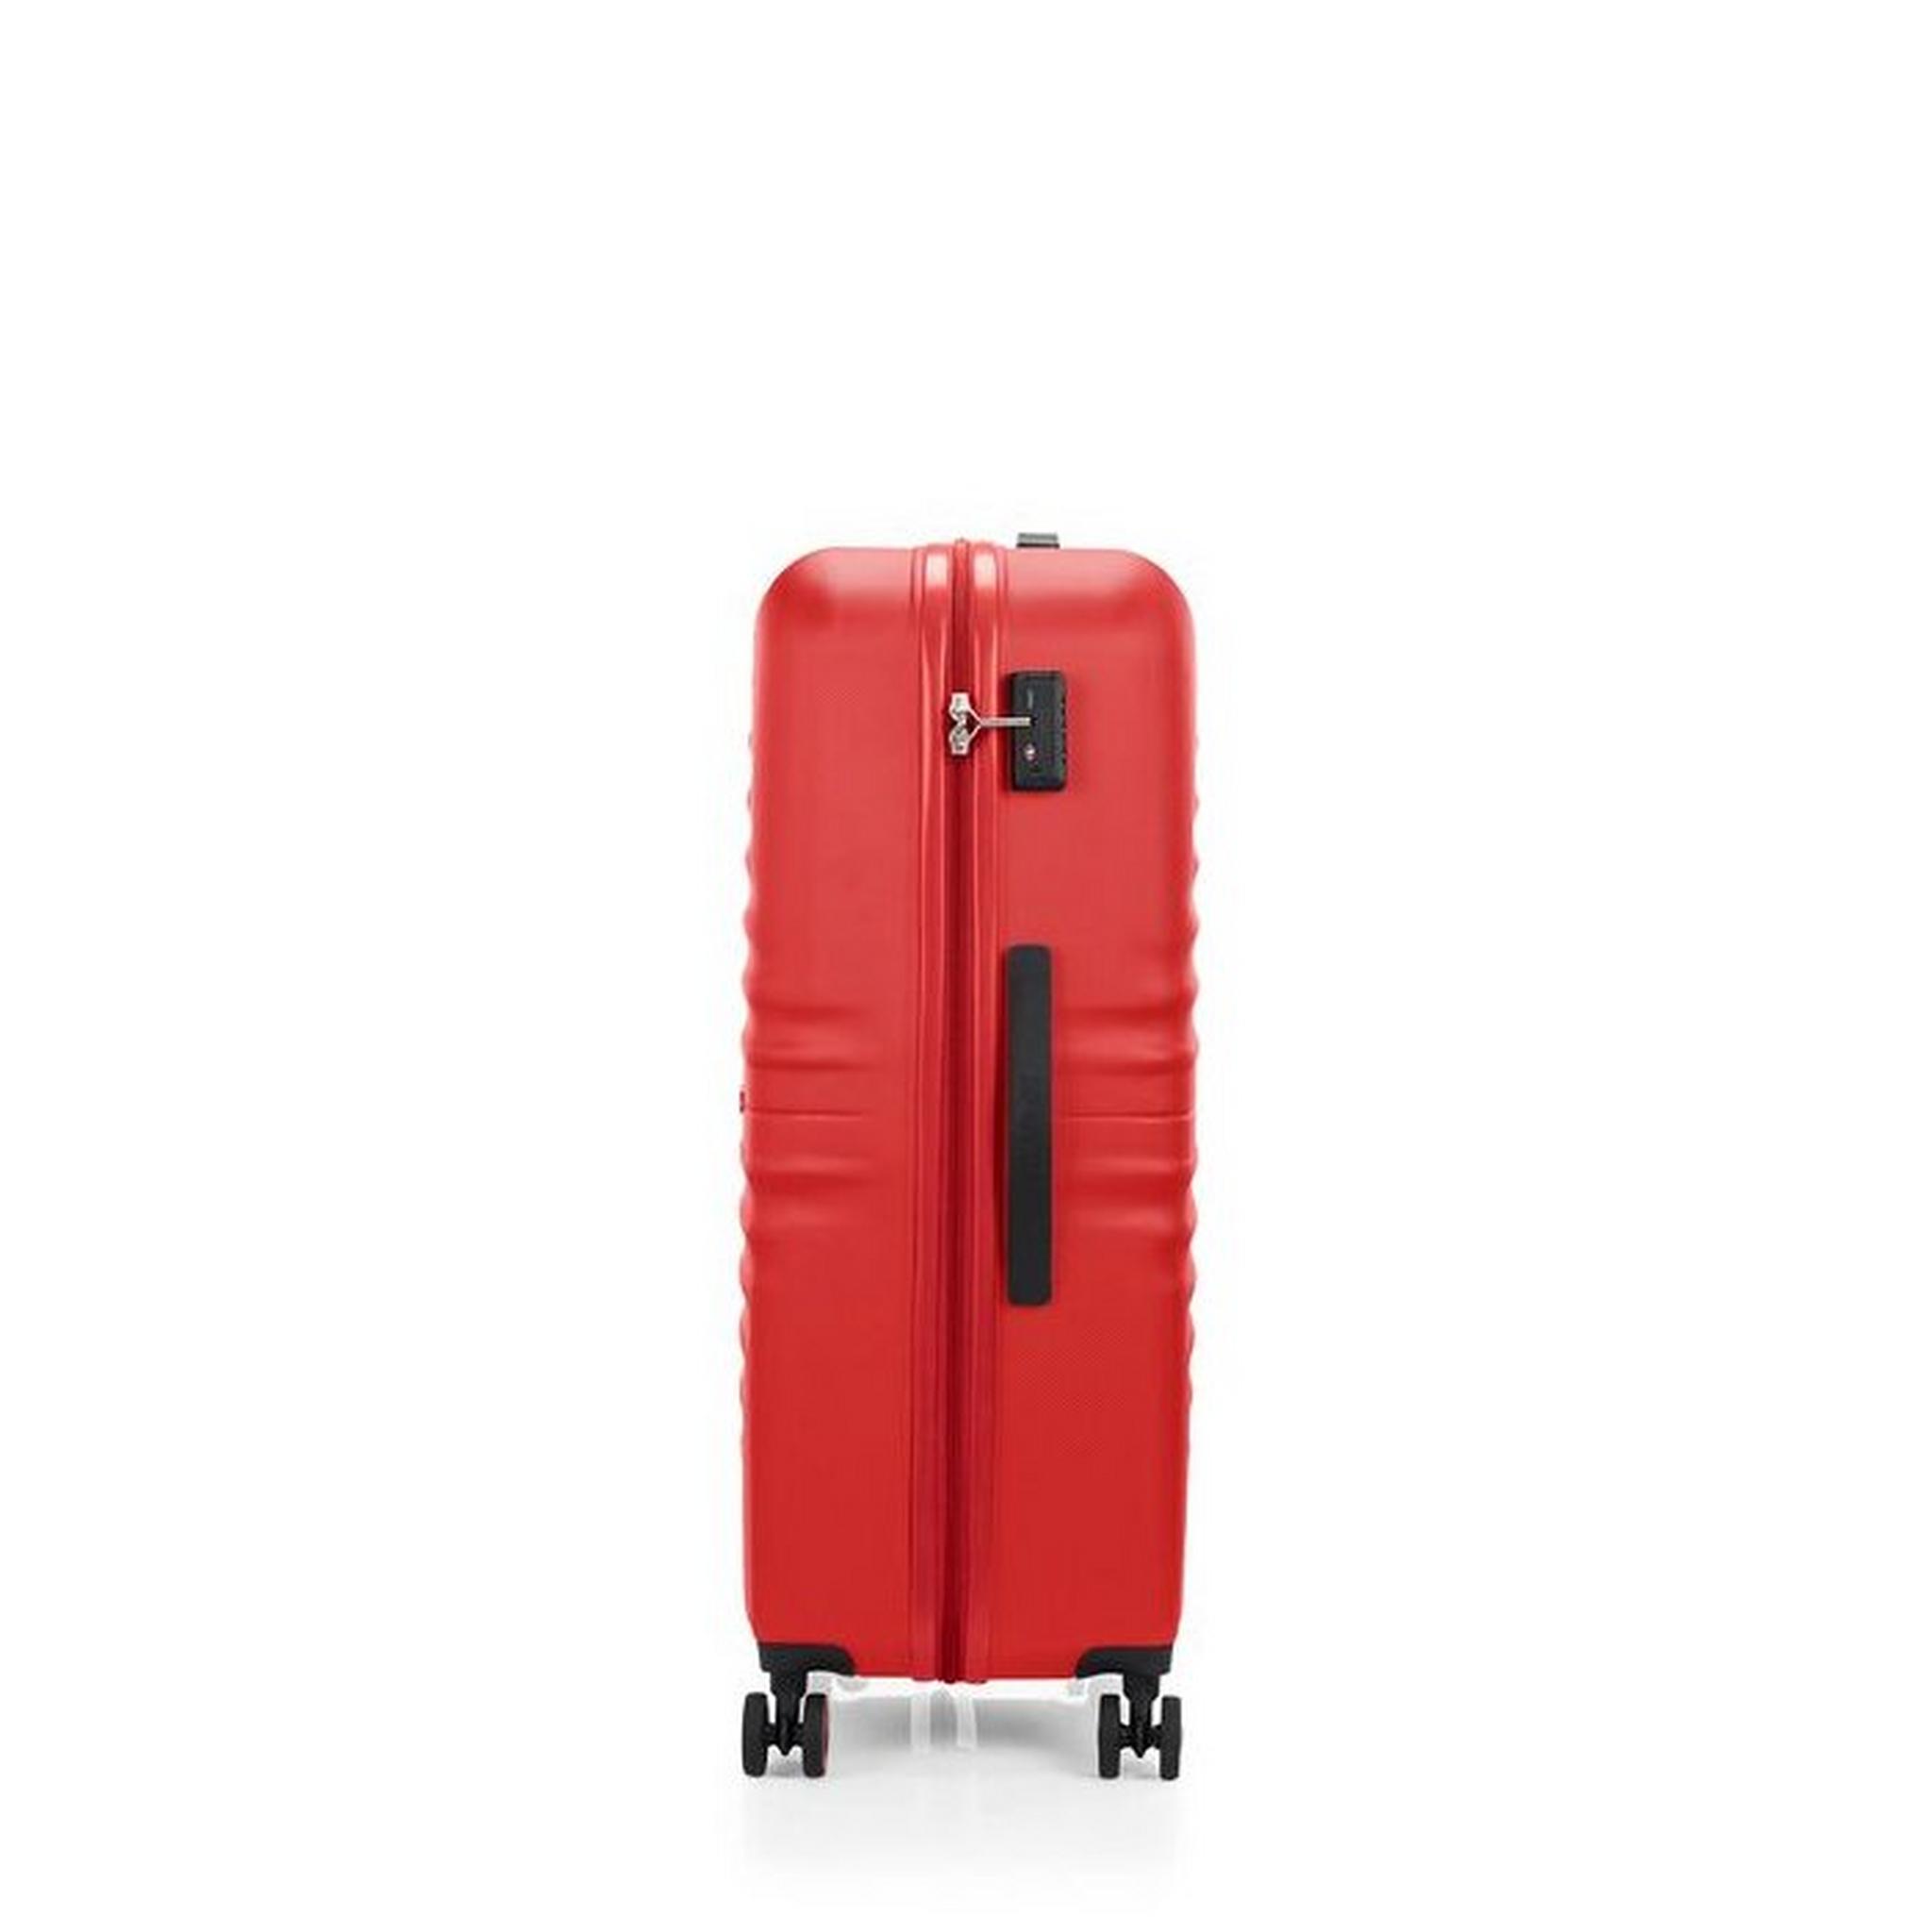 American Tourister TWIST WAVES SPINNER 55CM Hard Luggage, QC6X00006 - Vivid Red